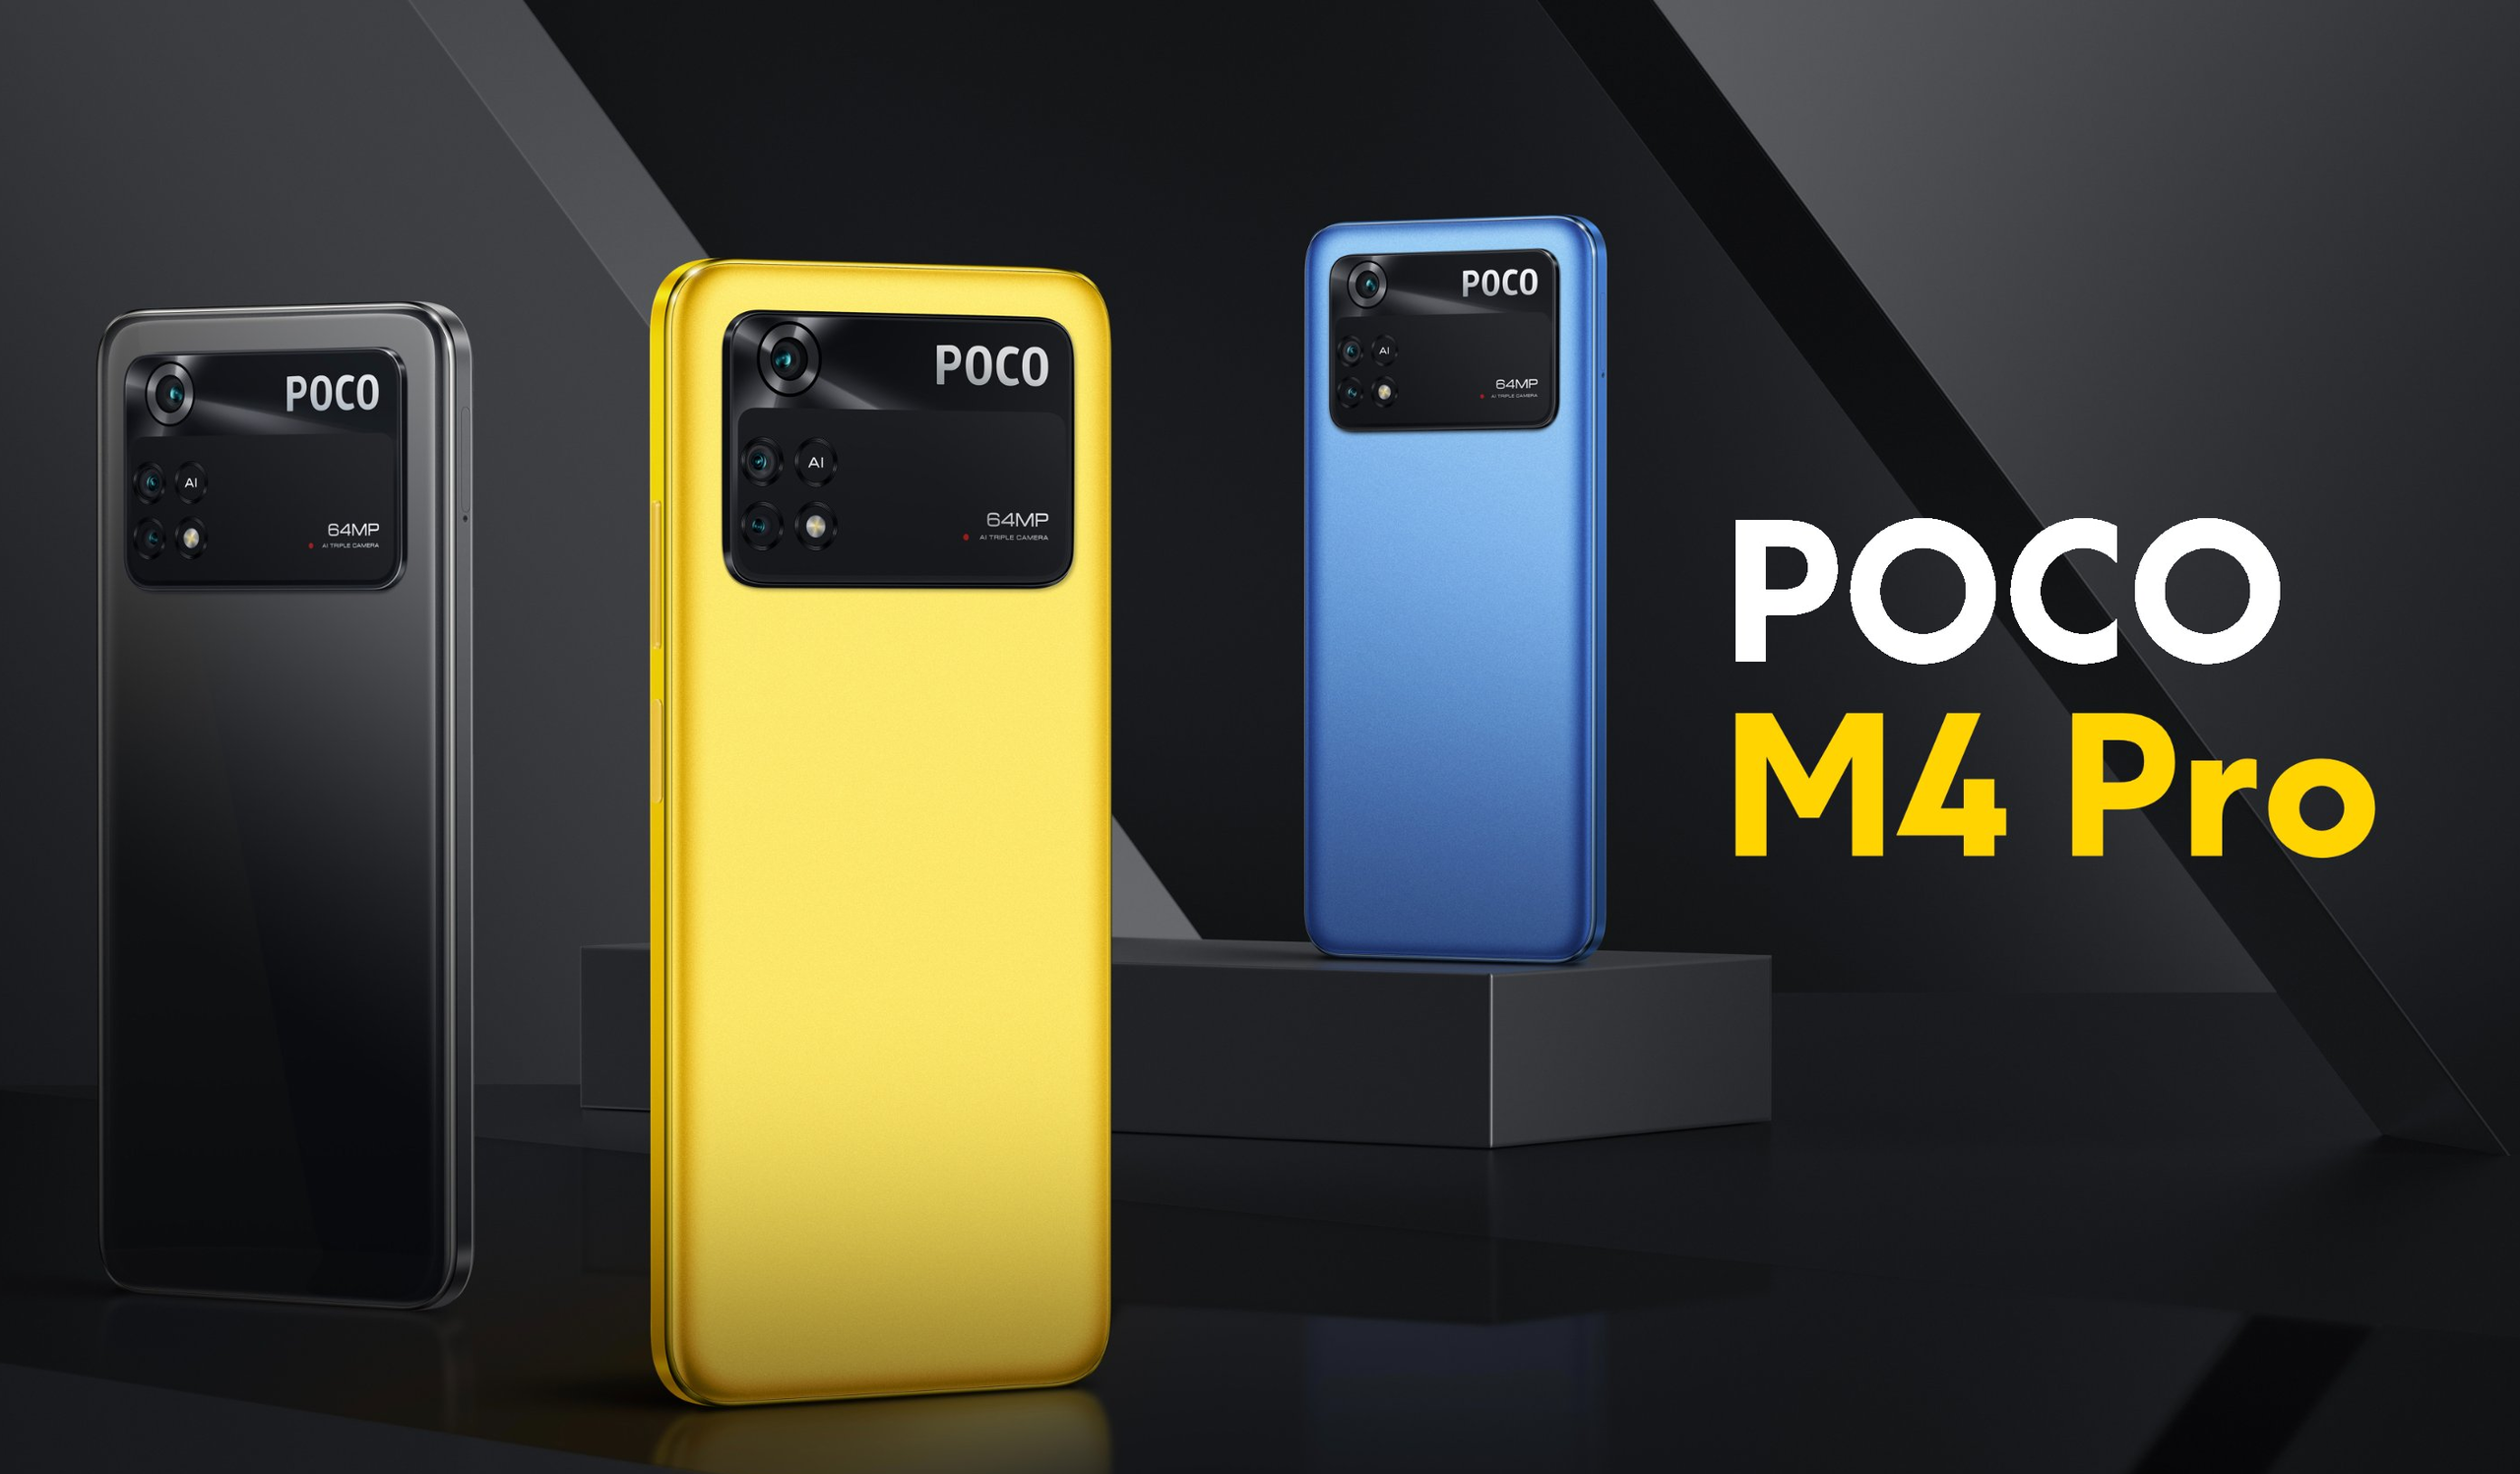 Xiaomi gives the POCO M4 Pro another go with a 4G model that also has an  AMOLED display - NotebookCheck.net News